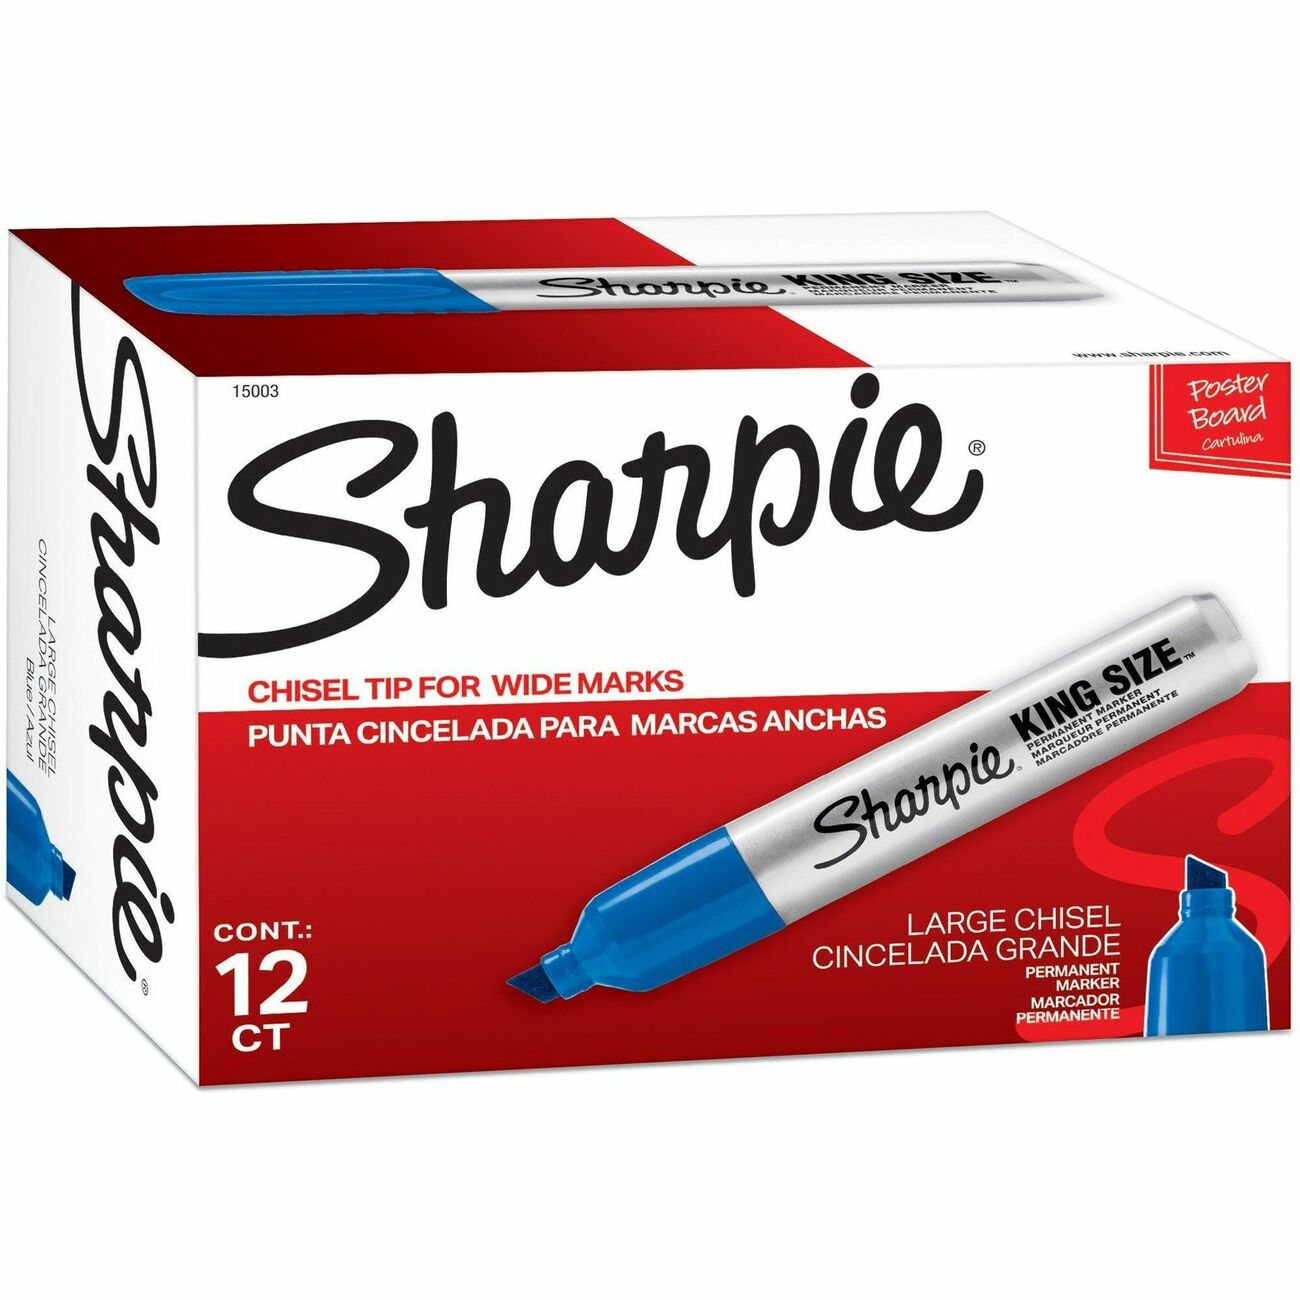 Sharpie Fine Point Permanent Marker - Fine Marker Point - 1 mm Marker Point  Size - Black Blue Red Green Yellow Purple Brown Orange Berry Lime Aqua   Alcohol Based Ink - 24 / Set